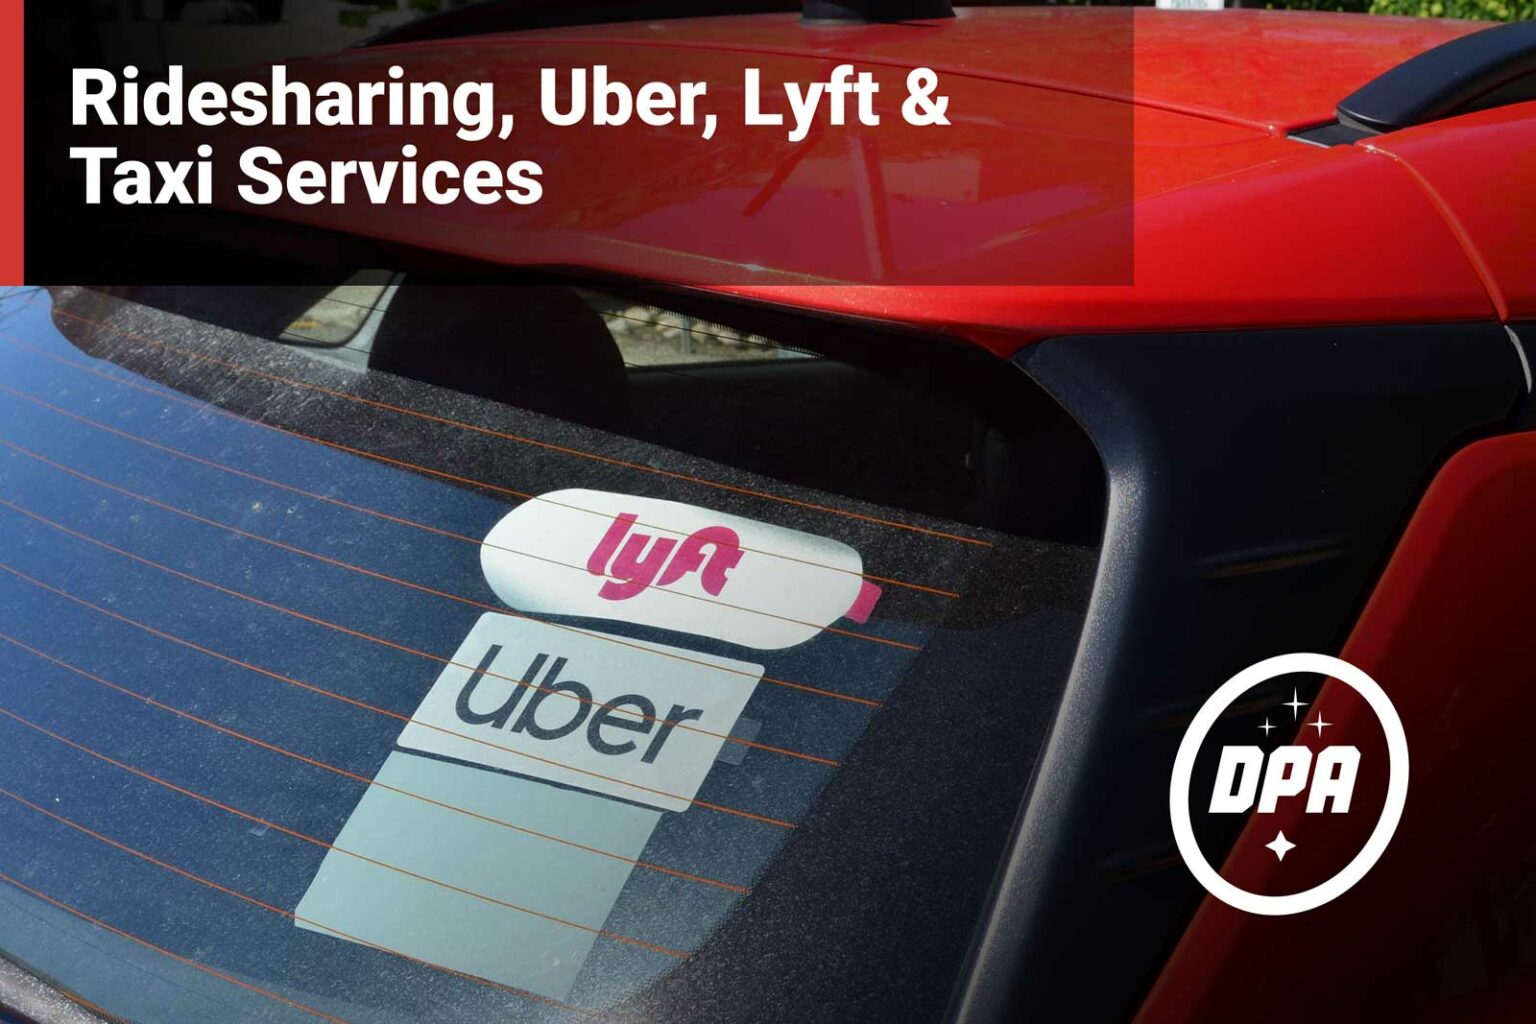 Ridesharing, Uber, Lyft & Taxi Services at the Contemporary Resort